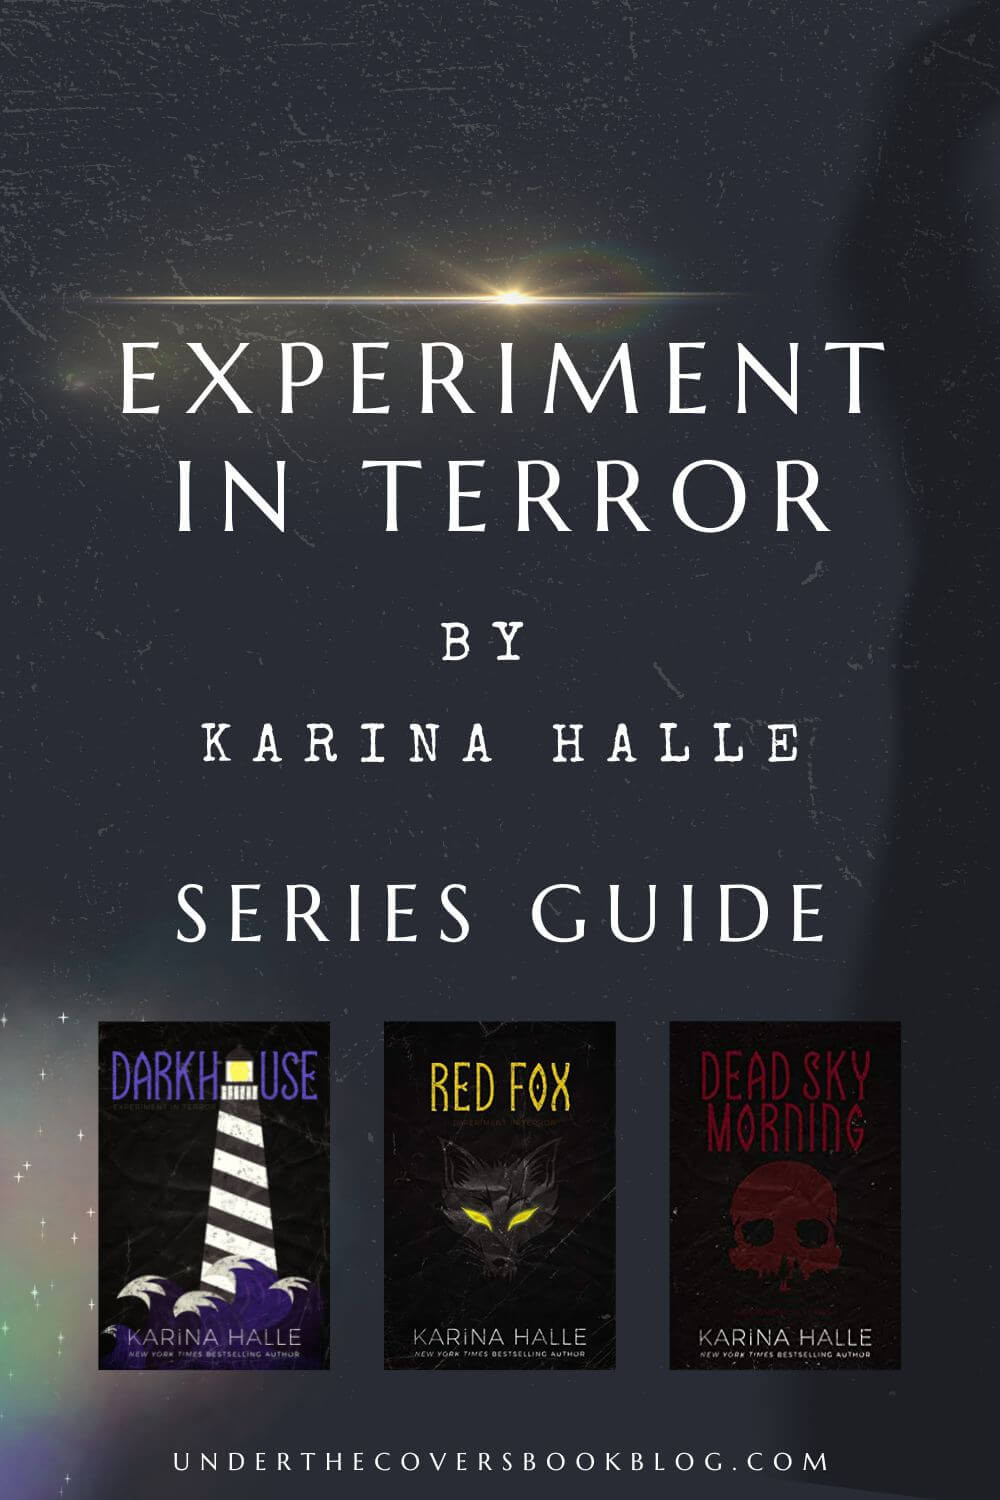 Experiment in Terror by Karina Halle Series Guide